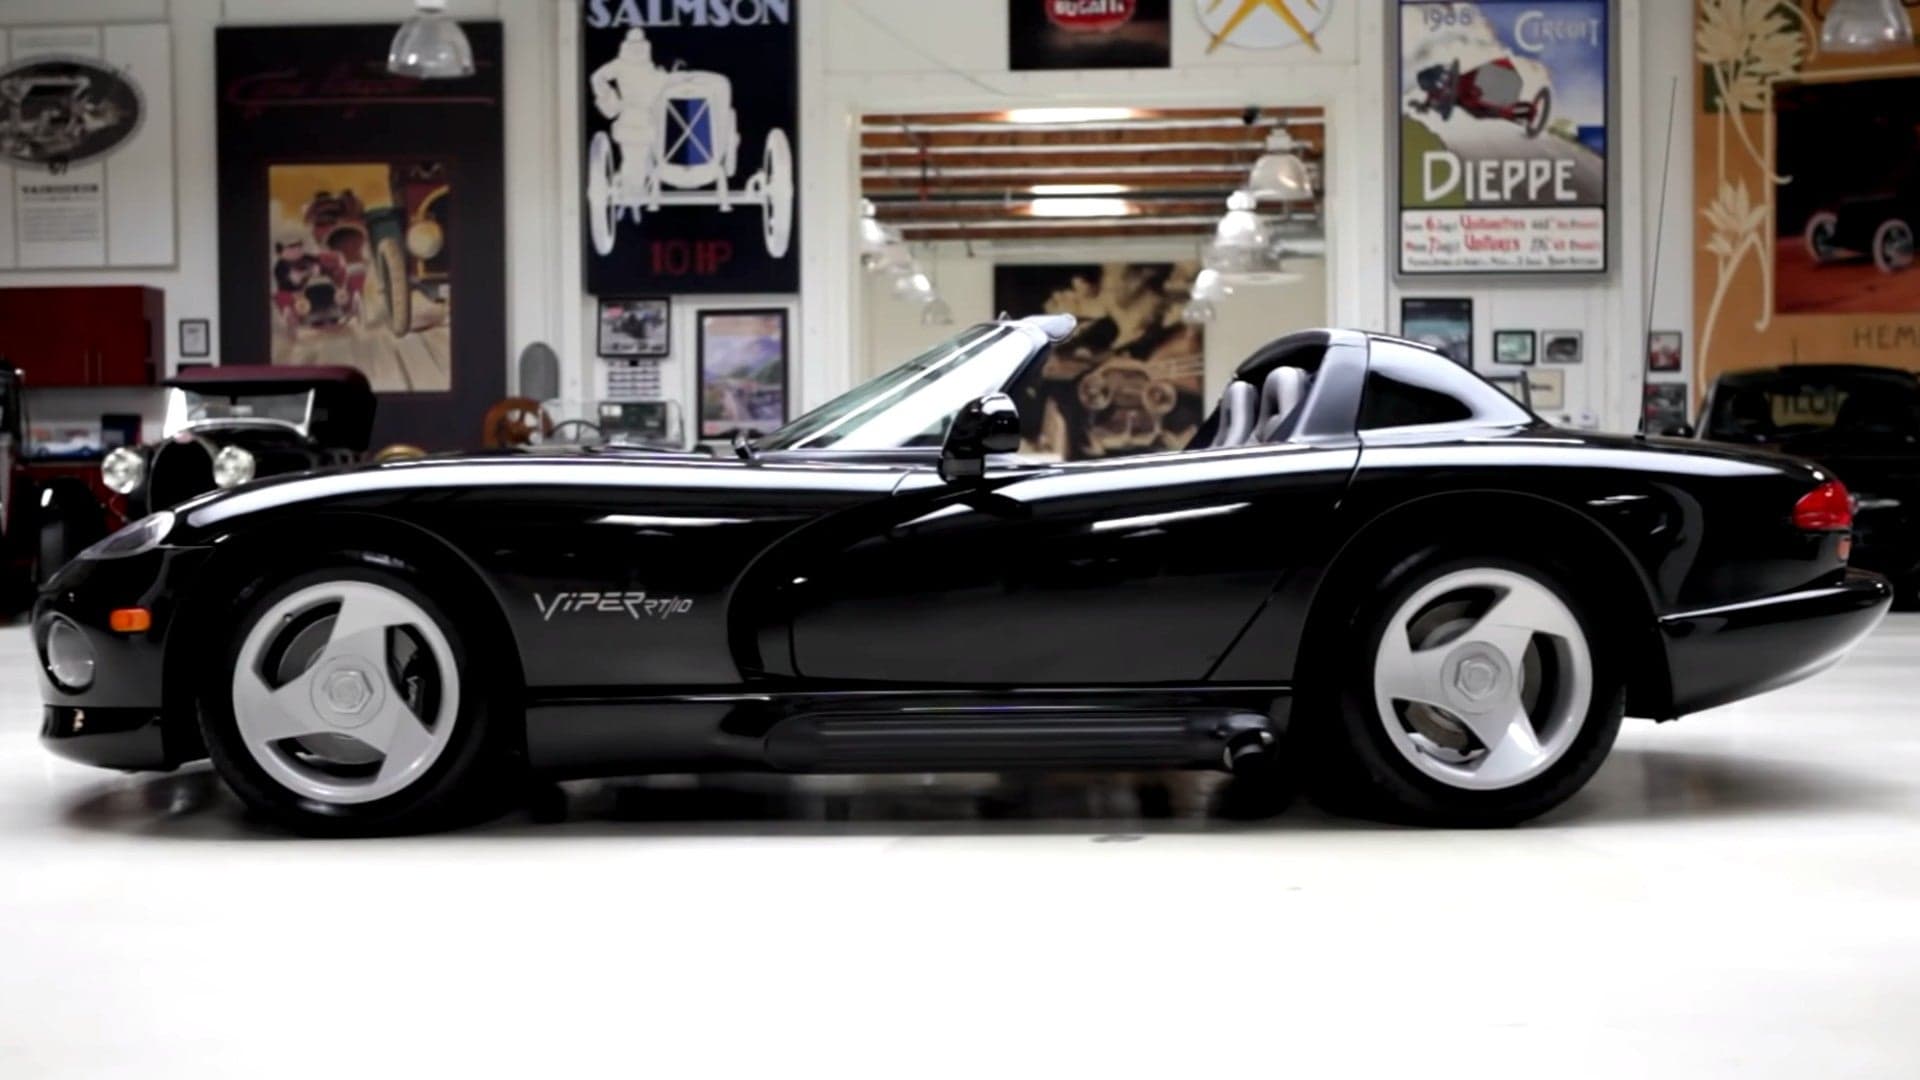 Jay Leno Shows Why the Original Dodge Viper Is Still a Riot to Drive Some 27 Years Later